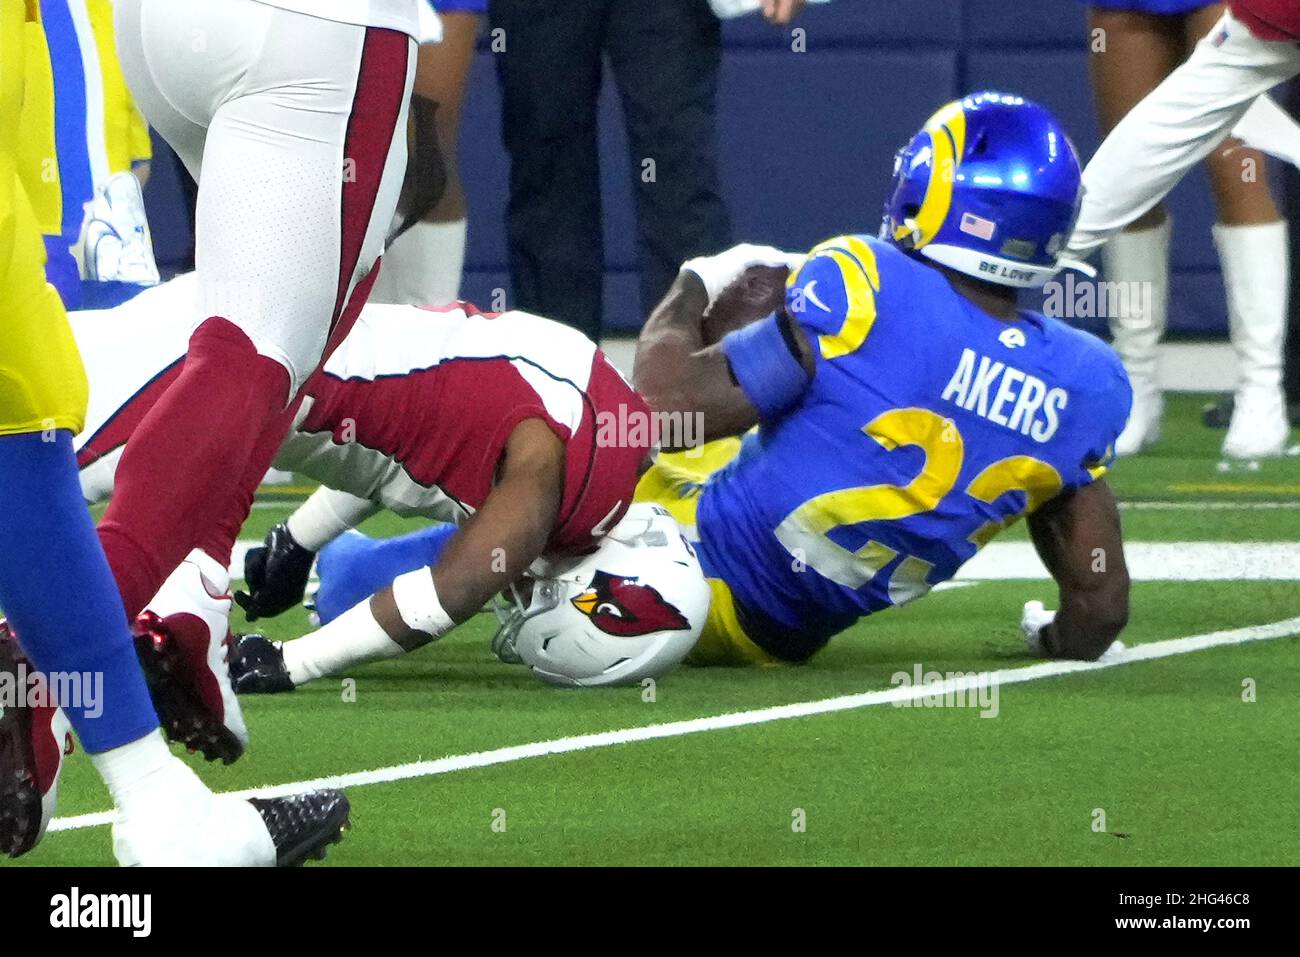 Arizona Cardinals' Buddy Baker lands on his neck tackling Los Angeles Rams'Cam Akers in their NFC wild card game at SoFi Stadium in Inglewood, California on Monday, January 17, 2022. The Rams beat the Cardinals 34-11. Photo by Jon SooHoo/UPI Stock Photo